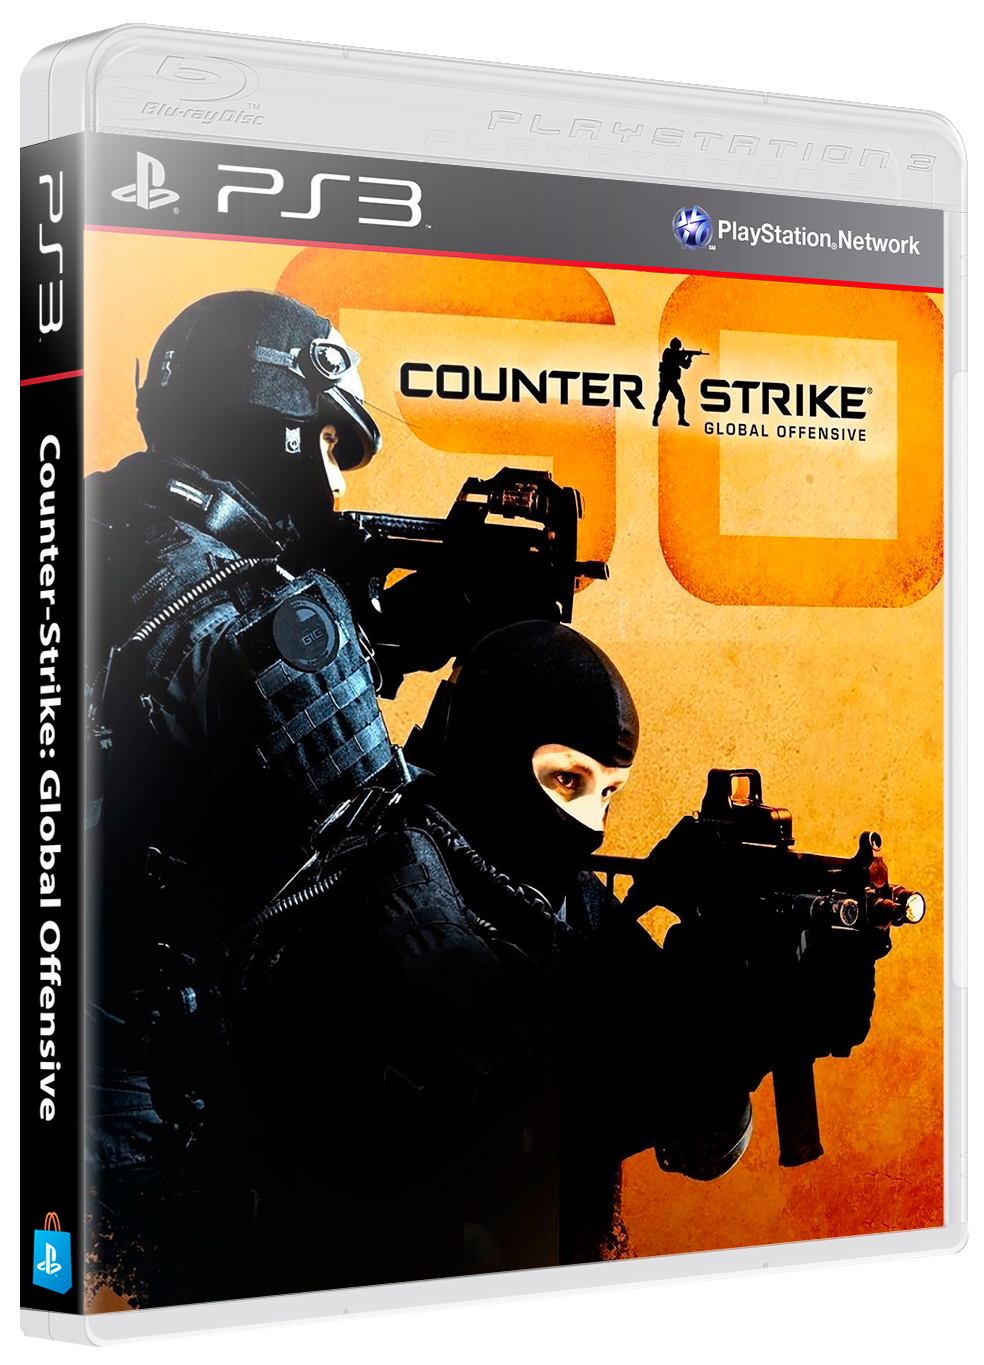 Go ps3. PLAYSTATION 3 CS go диск. Counter-Strike: Global Offensive диск пс3. Counter Strike Global Offensive ps3 диск. Контр страйк на пс3.